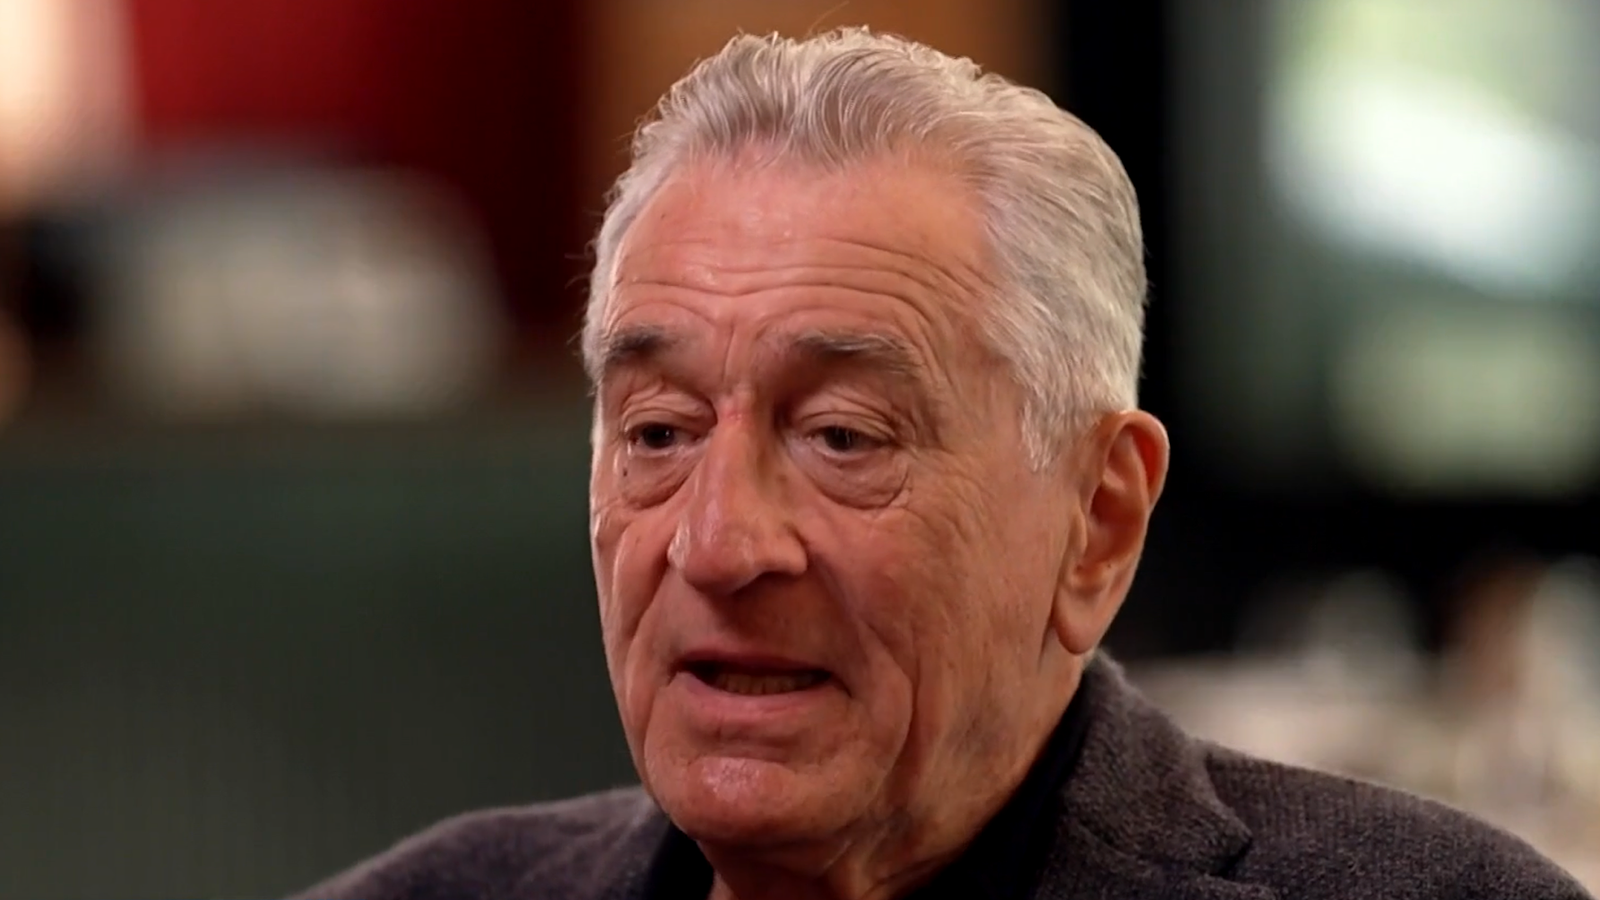 Robert De Niro Doesn't Hold Back In Deconstruction of Donald Trump: 'The Guy's a Monster'